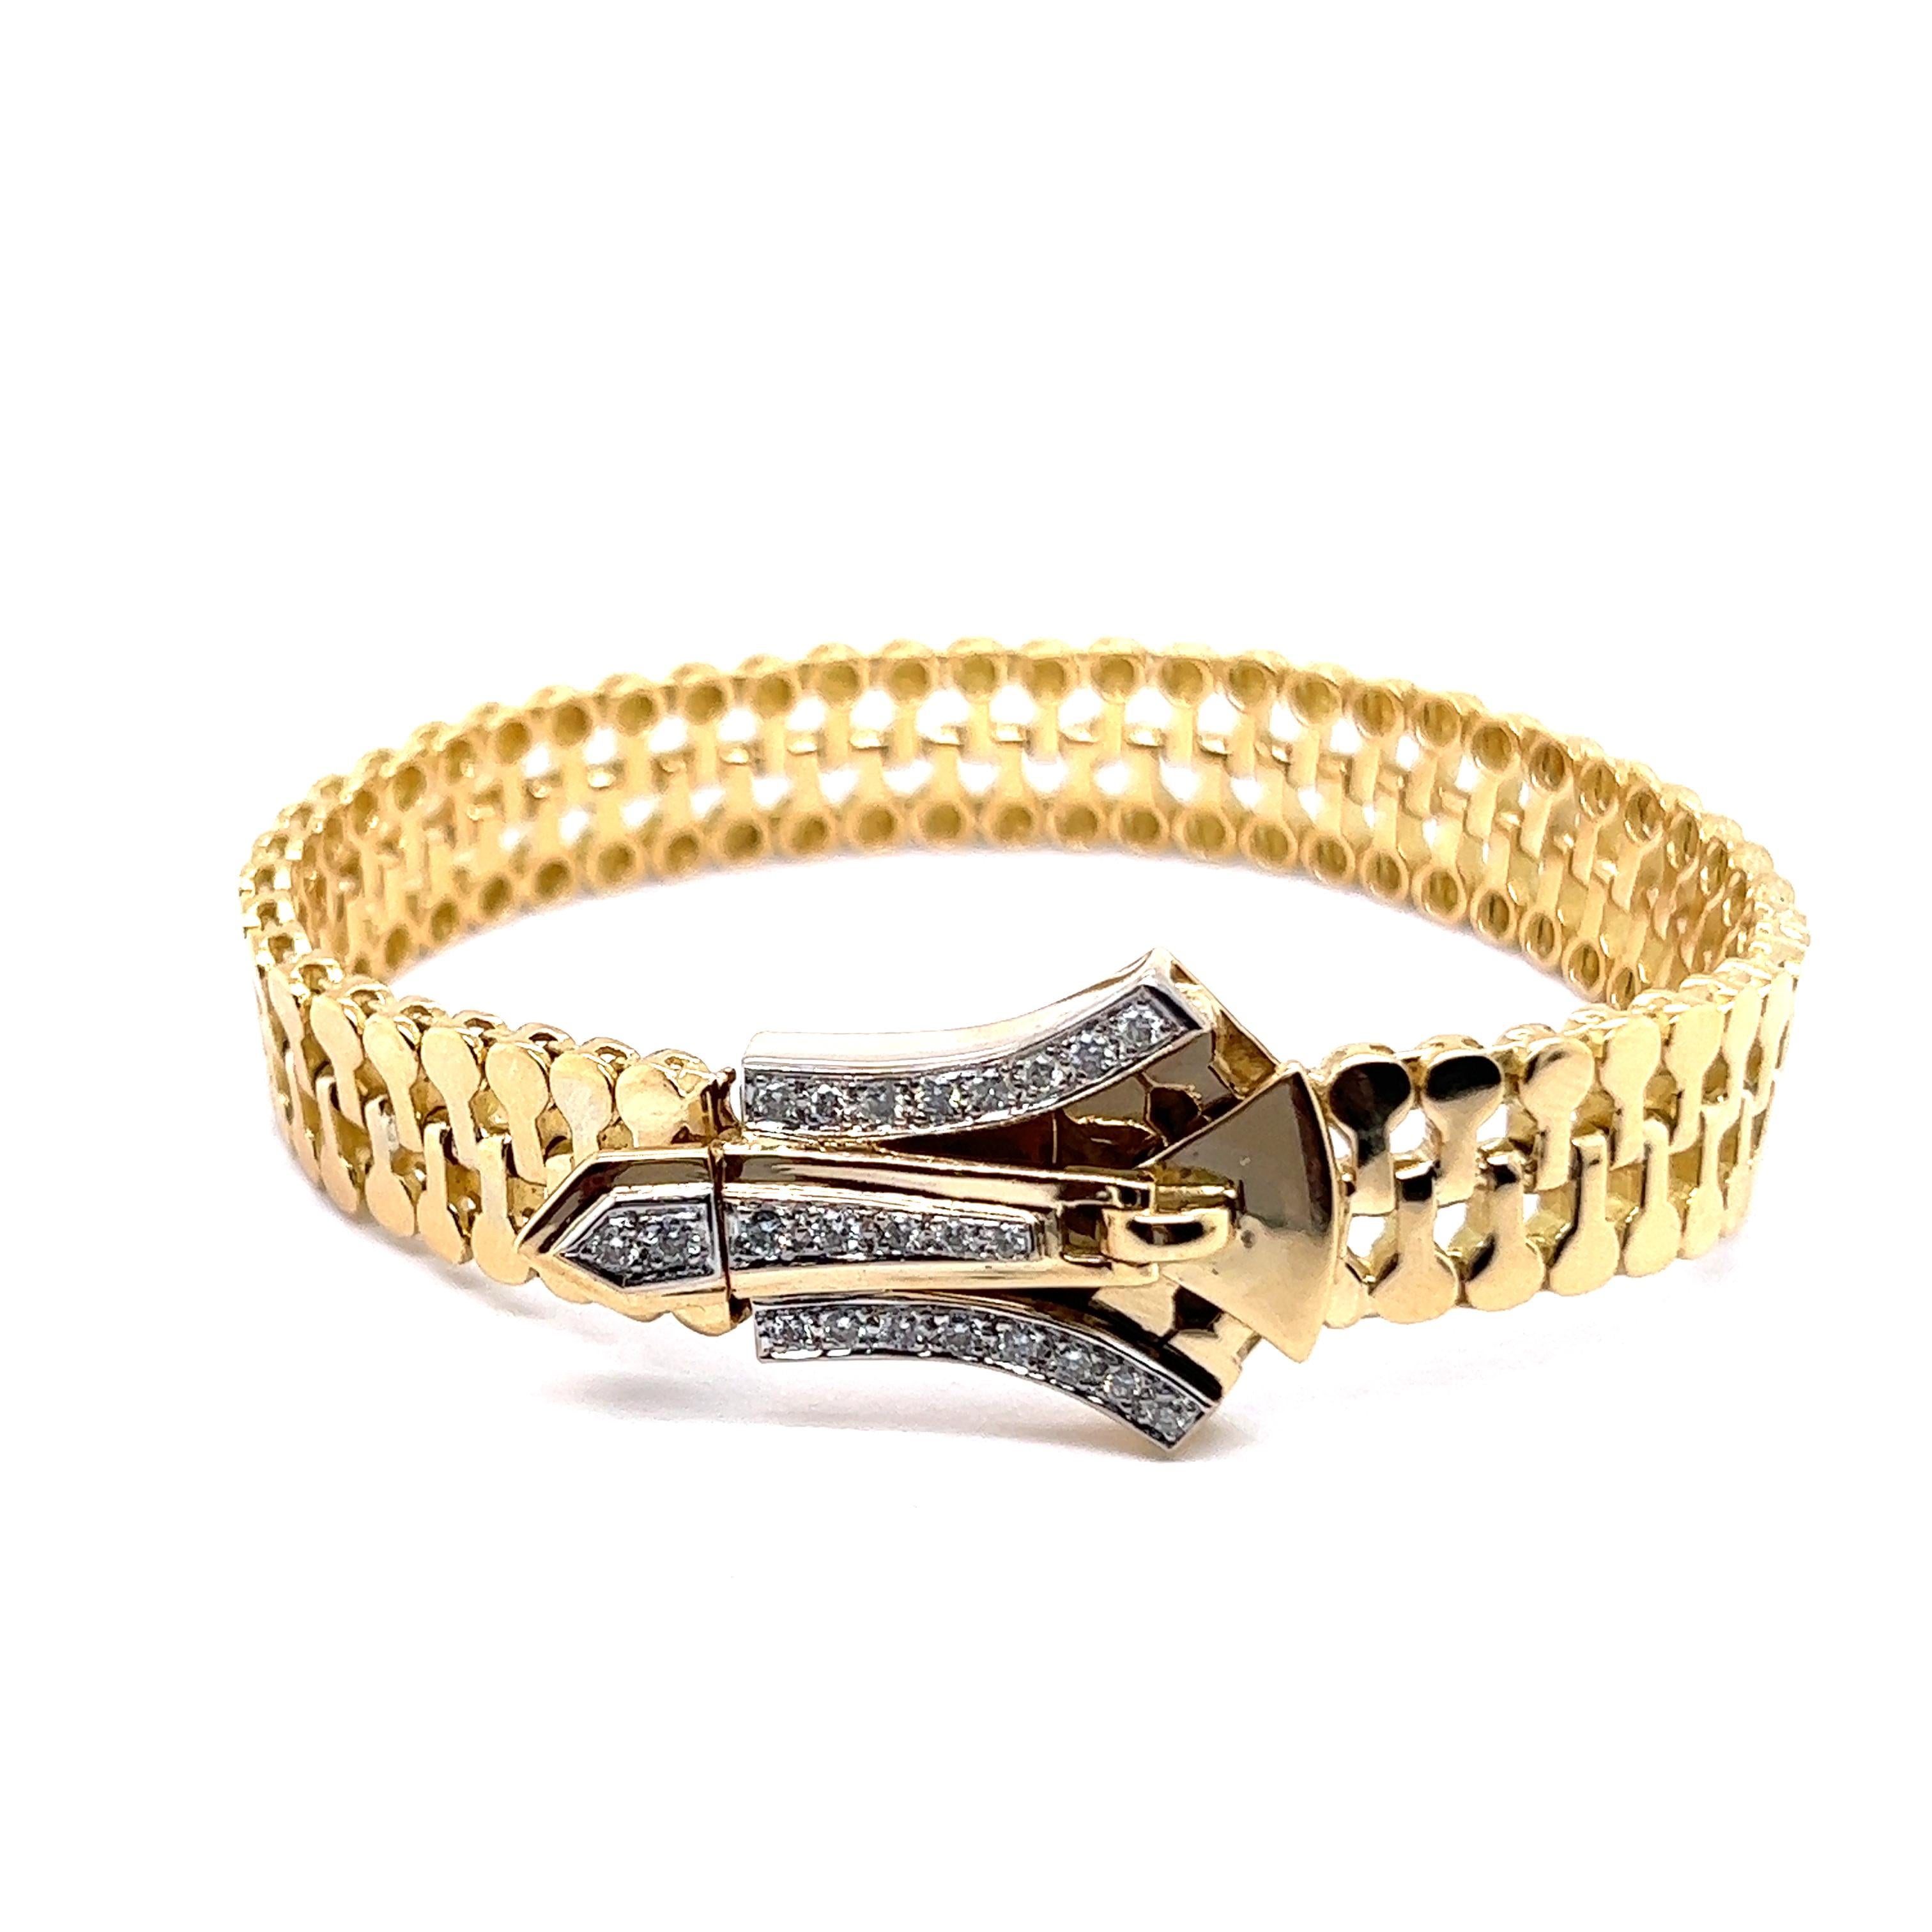 Introducing a remarkable 18 Karat Yellow and White Gold bracelet with Diamonds, designed in the shape of a zipper. This edgy bijou is truly a creative fusion of fashion history, functionality, and opulence, paying homage to the innovative spirit